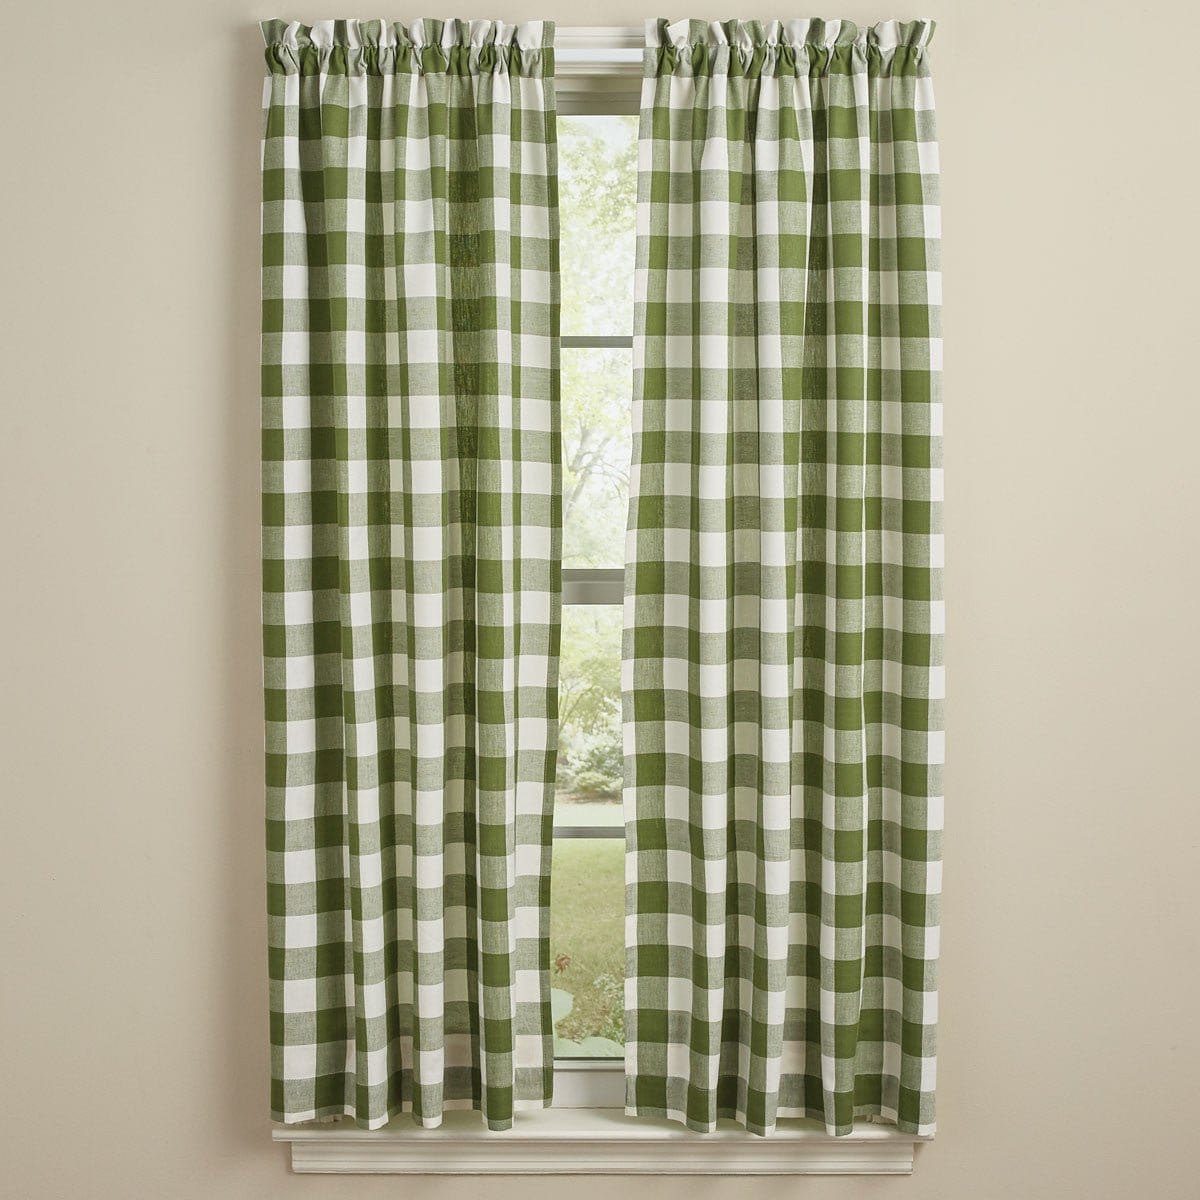 Wicklow Check in Sage Green Panel Pair With Tie Backs 63" Long Unlined-Park Designs-The Village Merchant